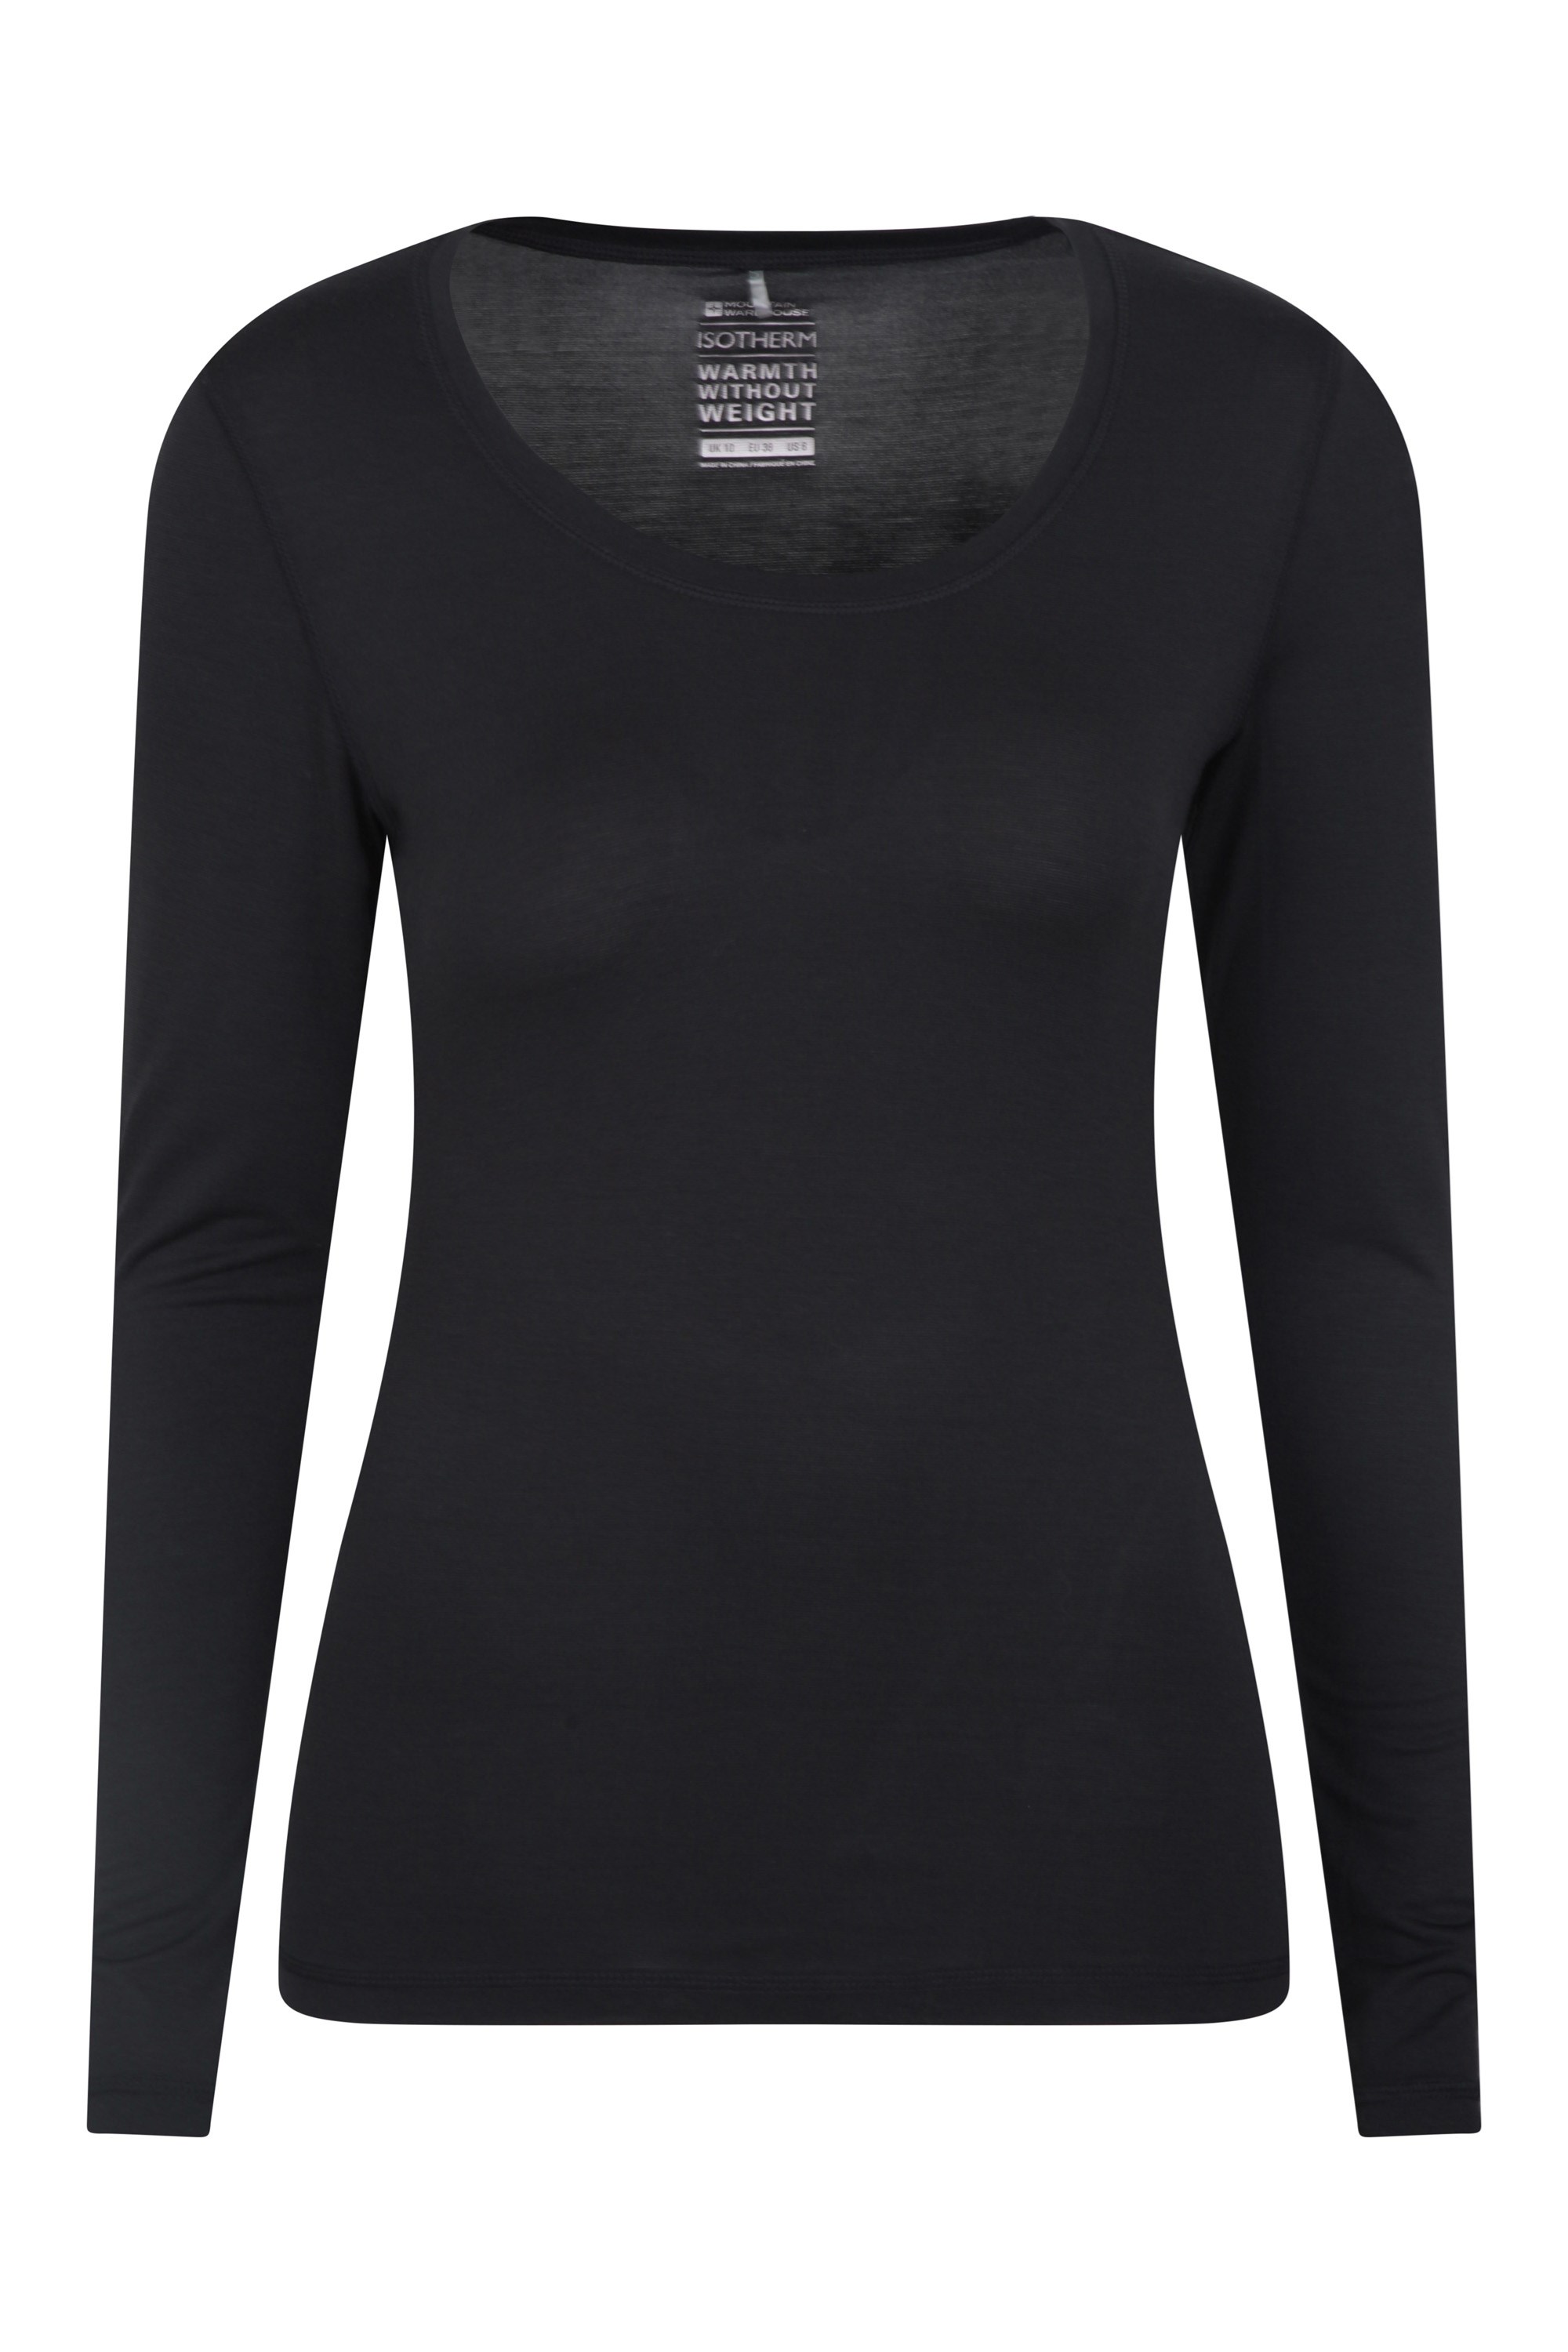 Keep The Heat Womens IsoTherm Thermal Top | Mountain Warehouse GB